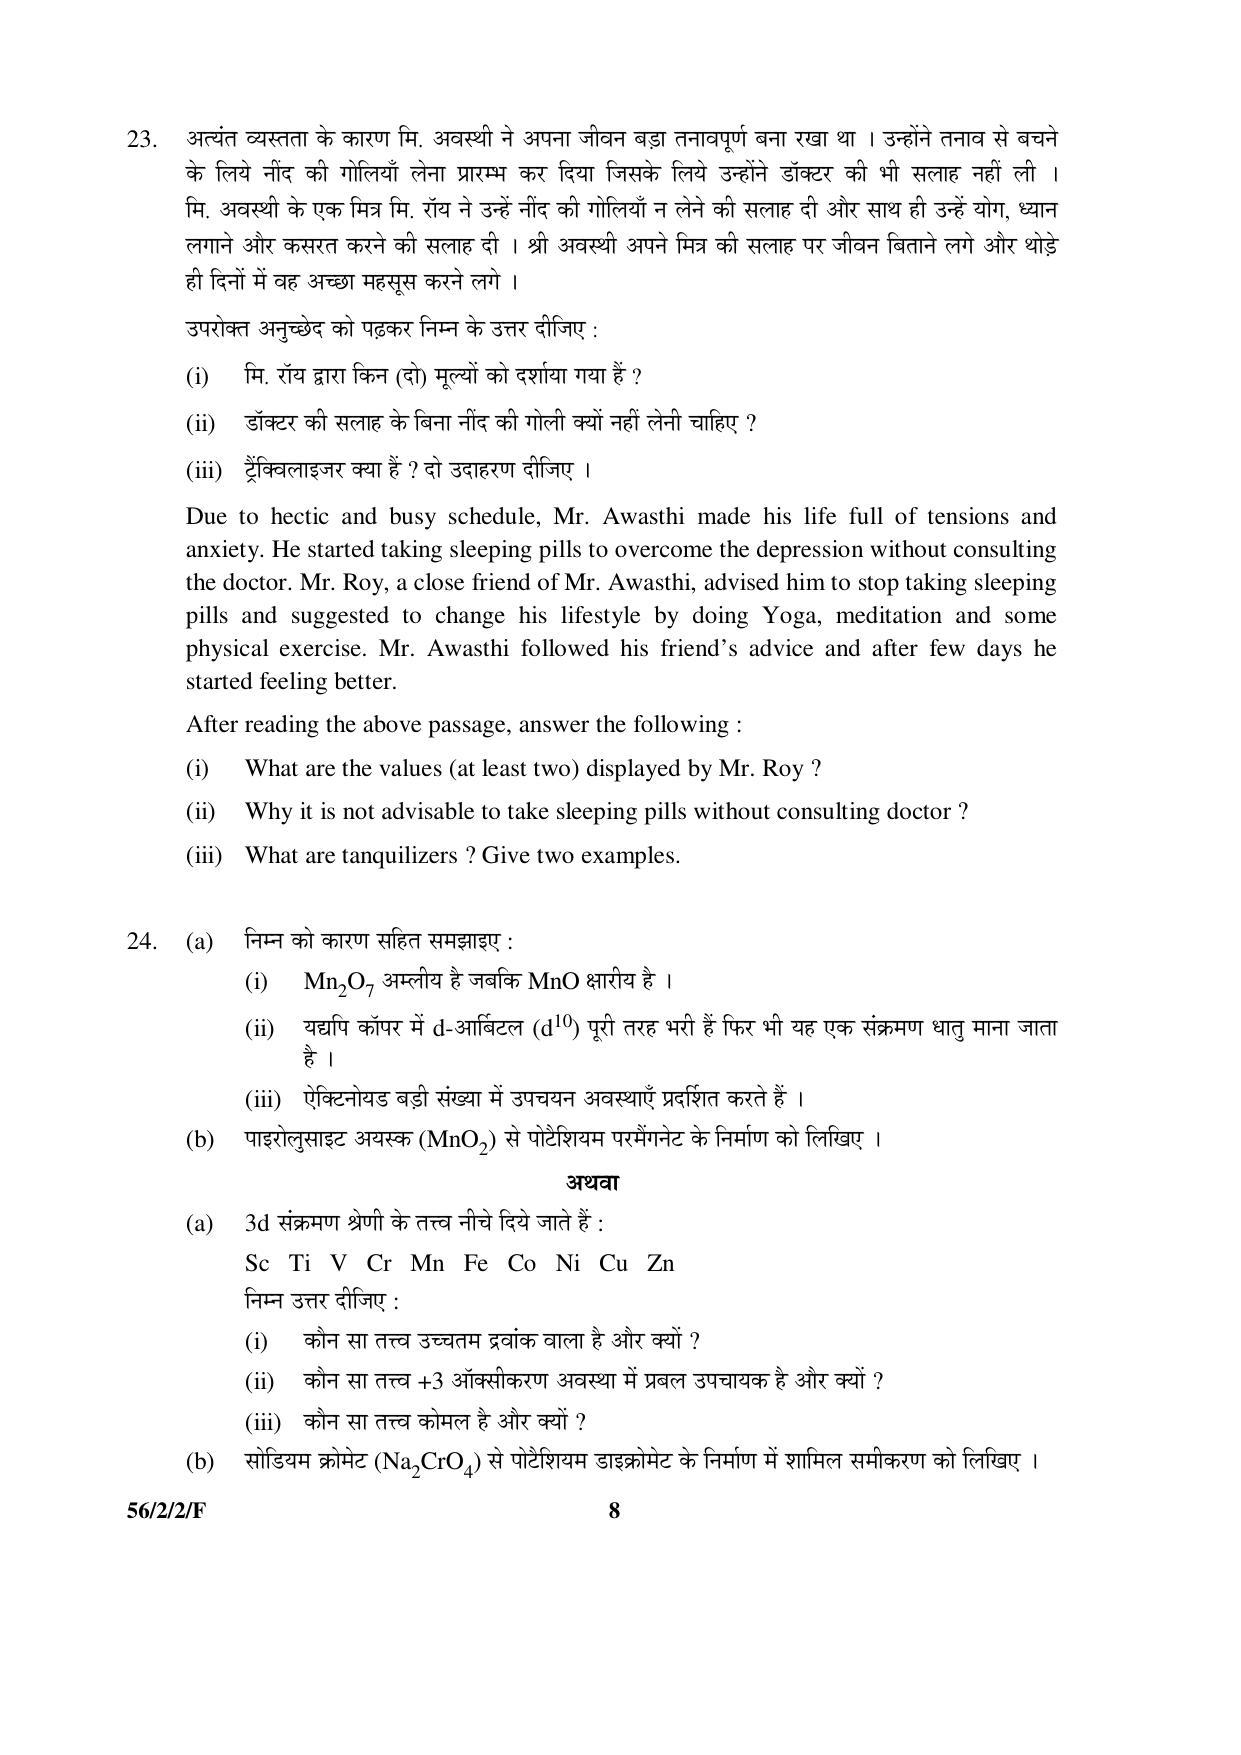 CBSE Class 12 56-2-2-F _Chemistry_ 2016 Question Paper - Page 8